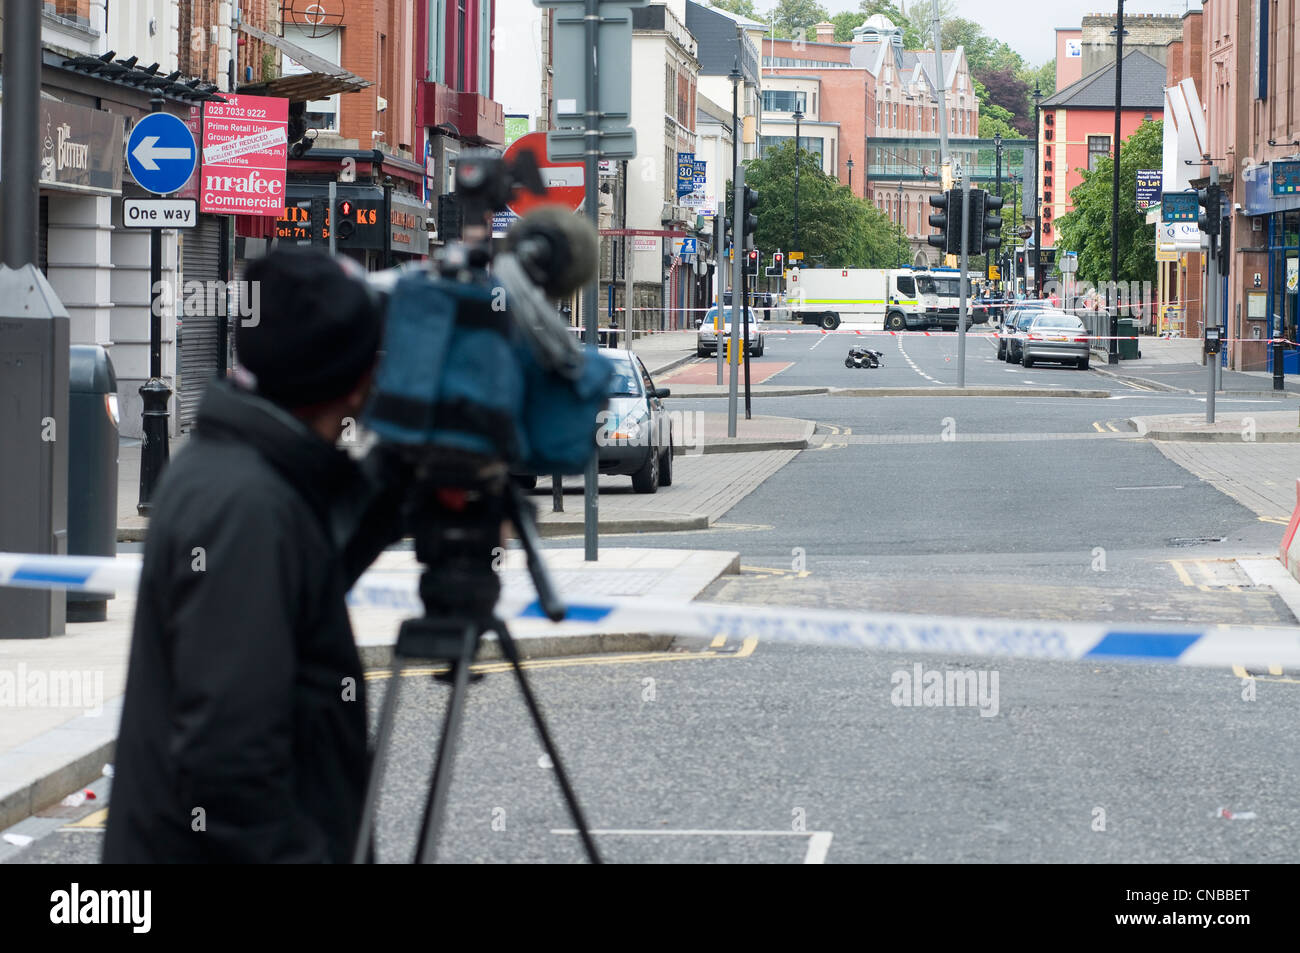 United Kingdom, Northern Ireland, Derry county, Derry or Londonderry, bomb scare in Strand Road, robots of mine clearance Stock Photo